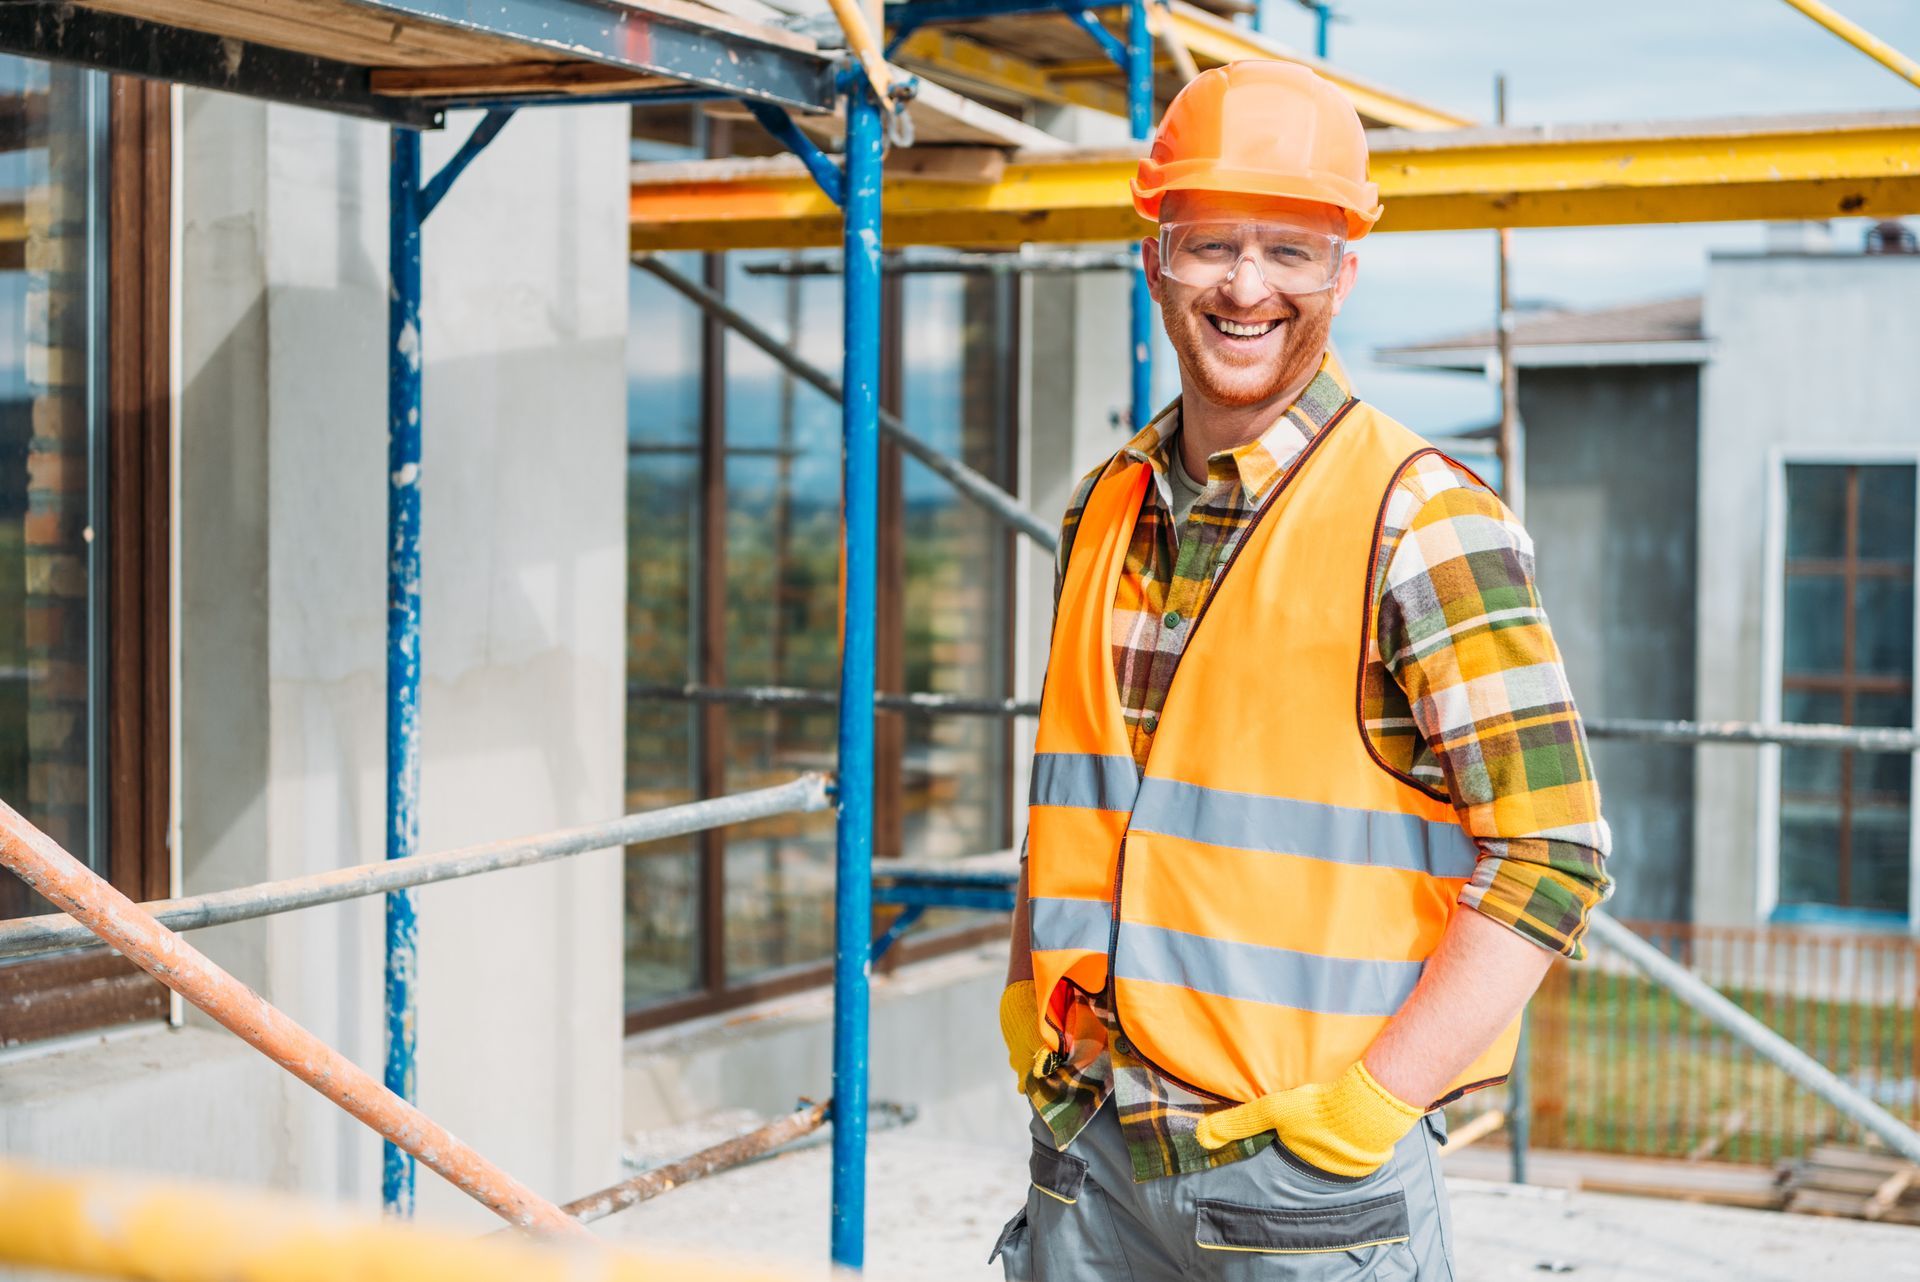 smiling builder in reflective vest and hard hat standing in front of scaffolding - demonstrating scaffolding safety